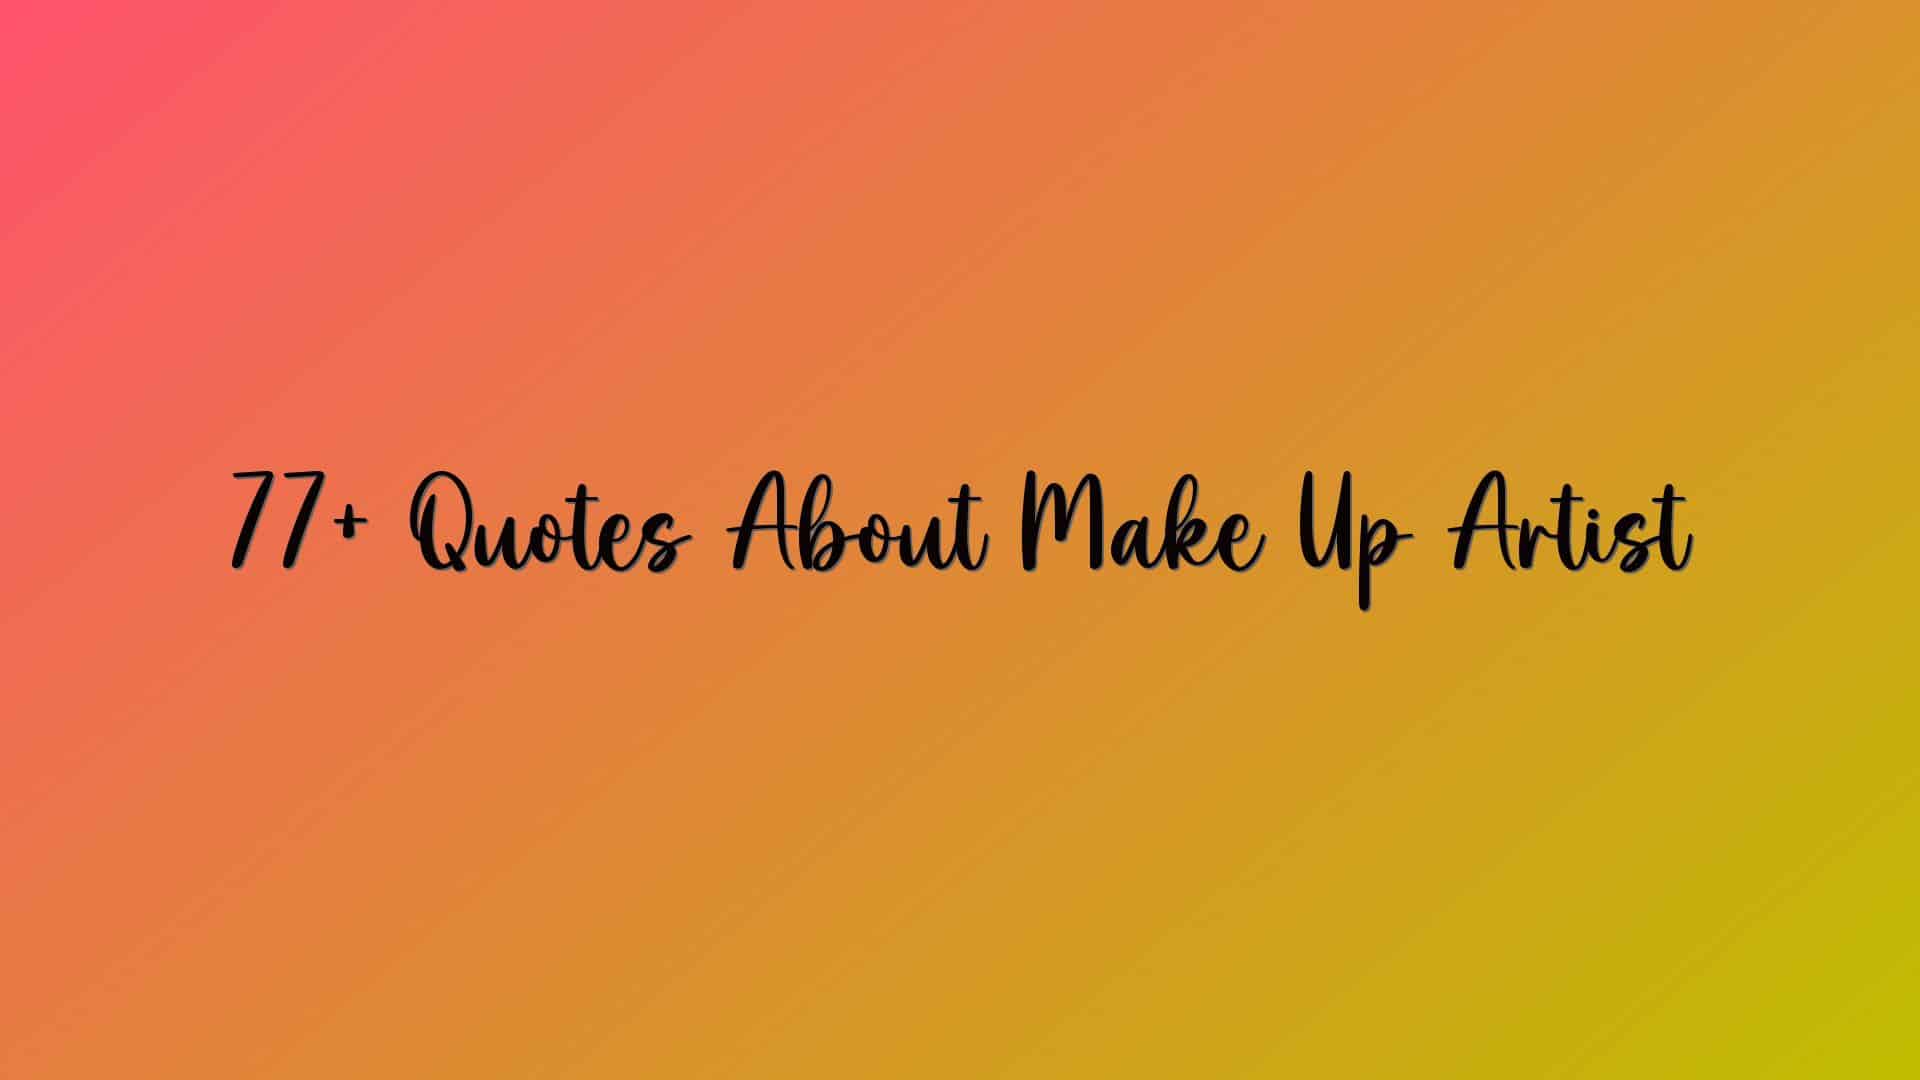 77+ Quotes About Make Up Artist